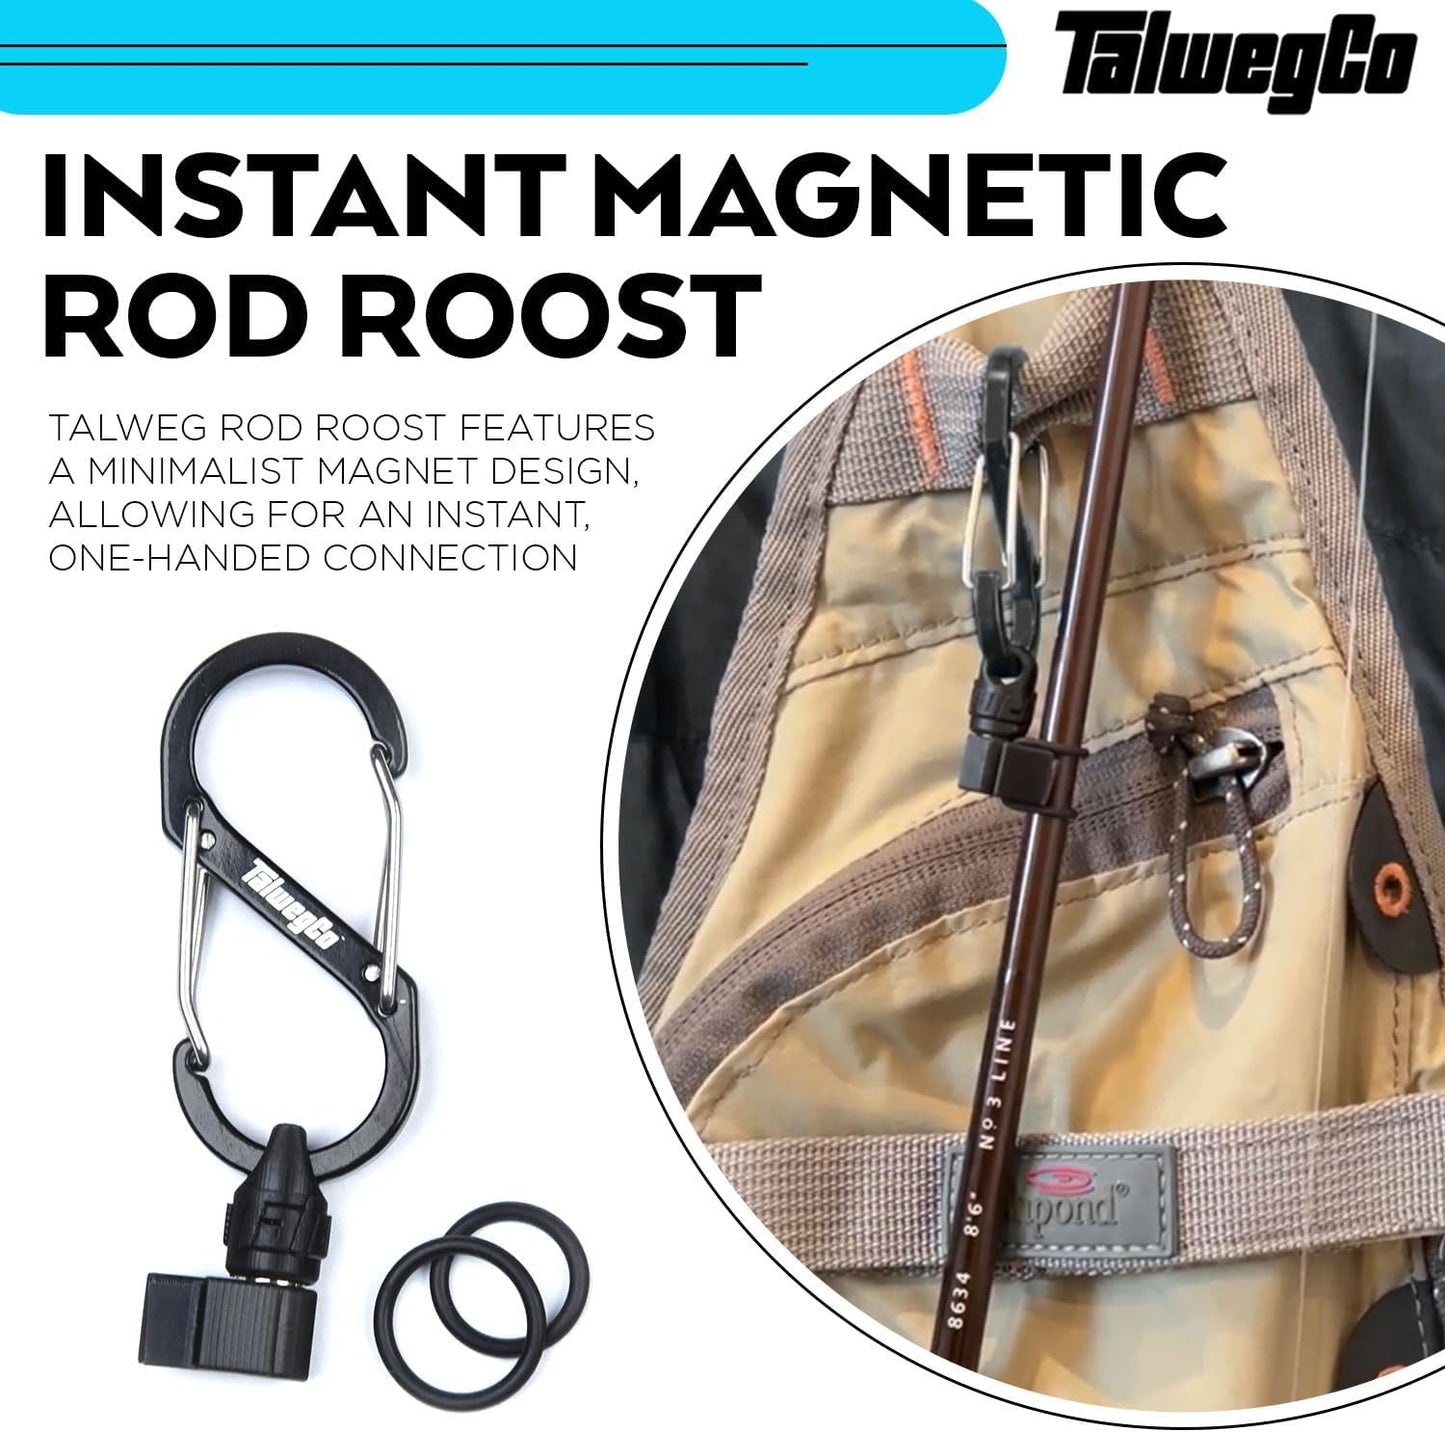 Banded Rod Roost - Instant Magnetic Rod Holder Fly Fishing Gear (Black), 6.5 X 2.75 X 1.75